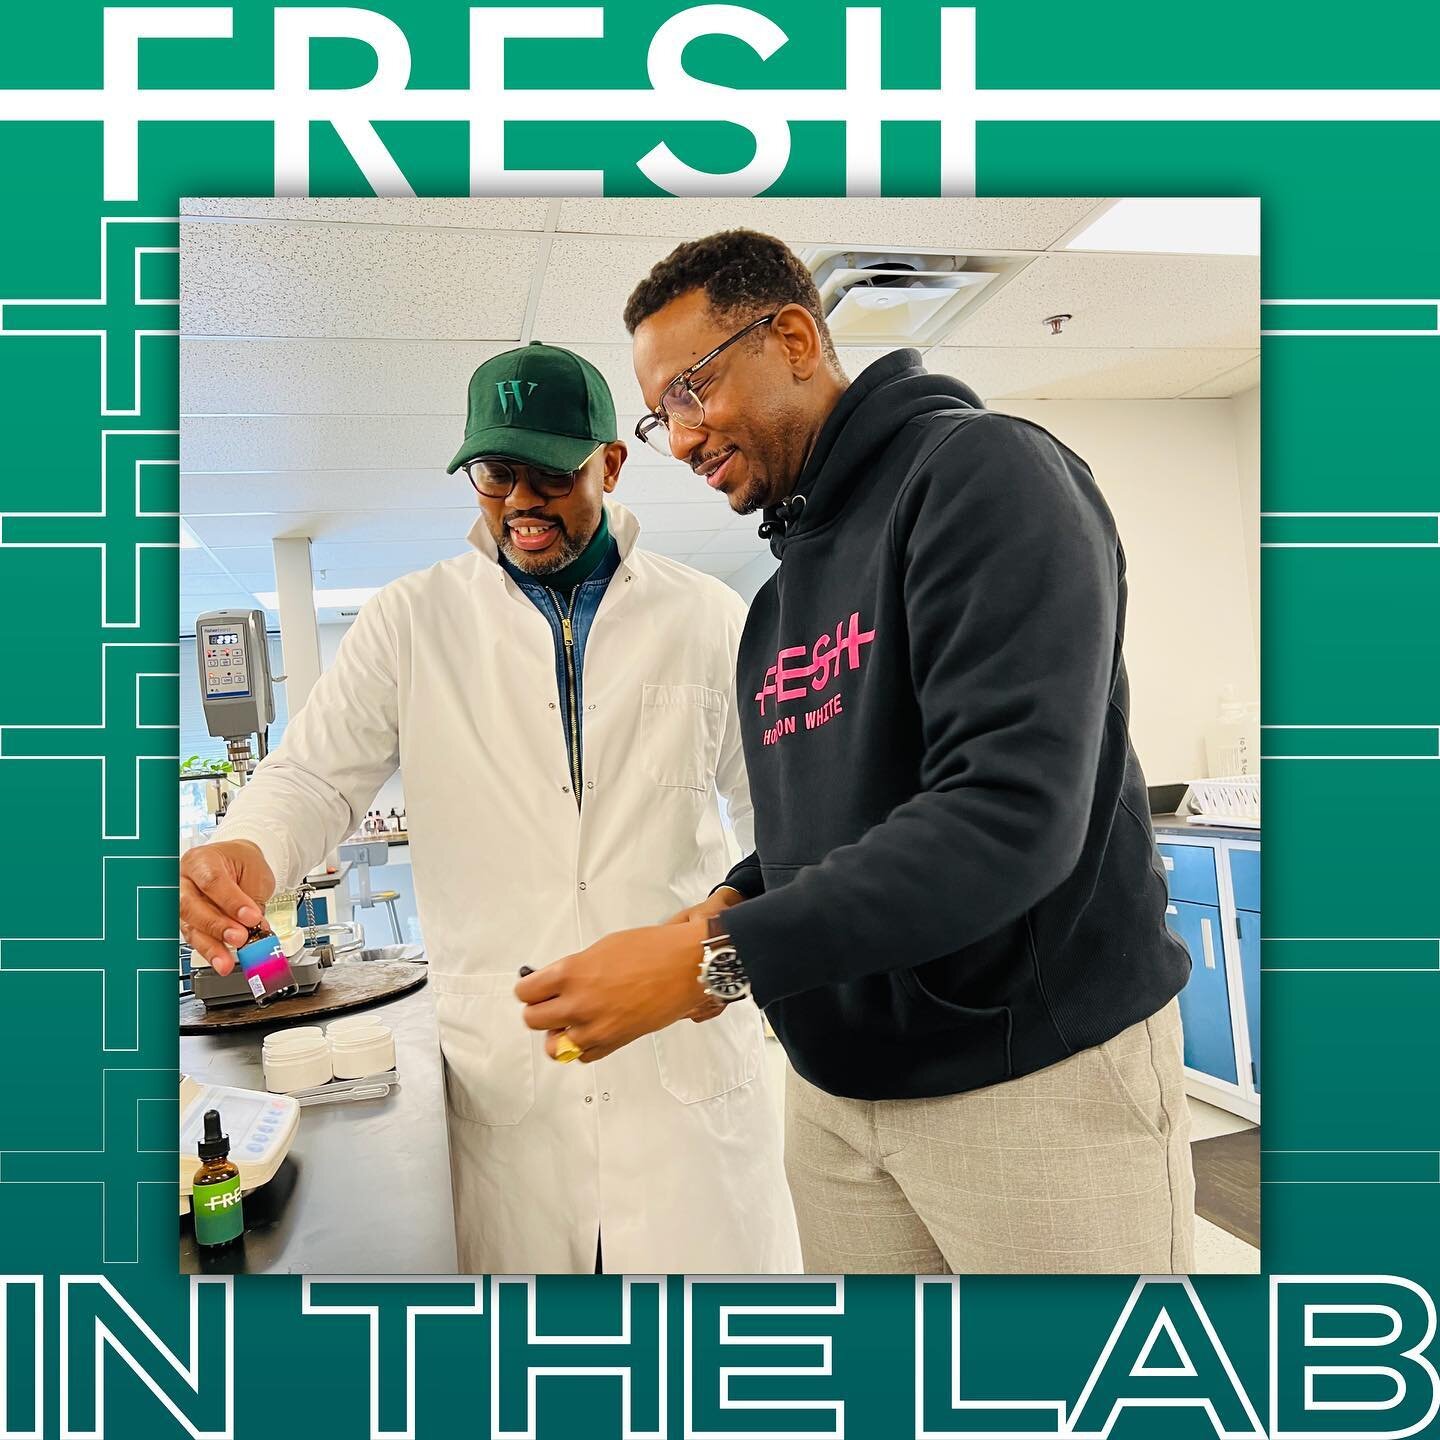 BTW, Houston wears a lab coat when he's testing new scents. He likes a strong, solid aroma with all the haircare and bodycare in his line. Have you noticed the dope scents?